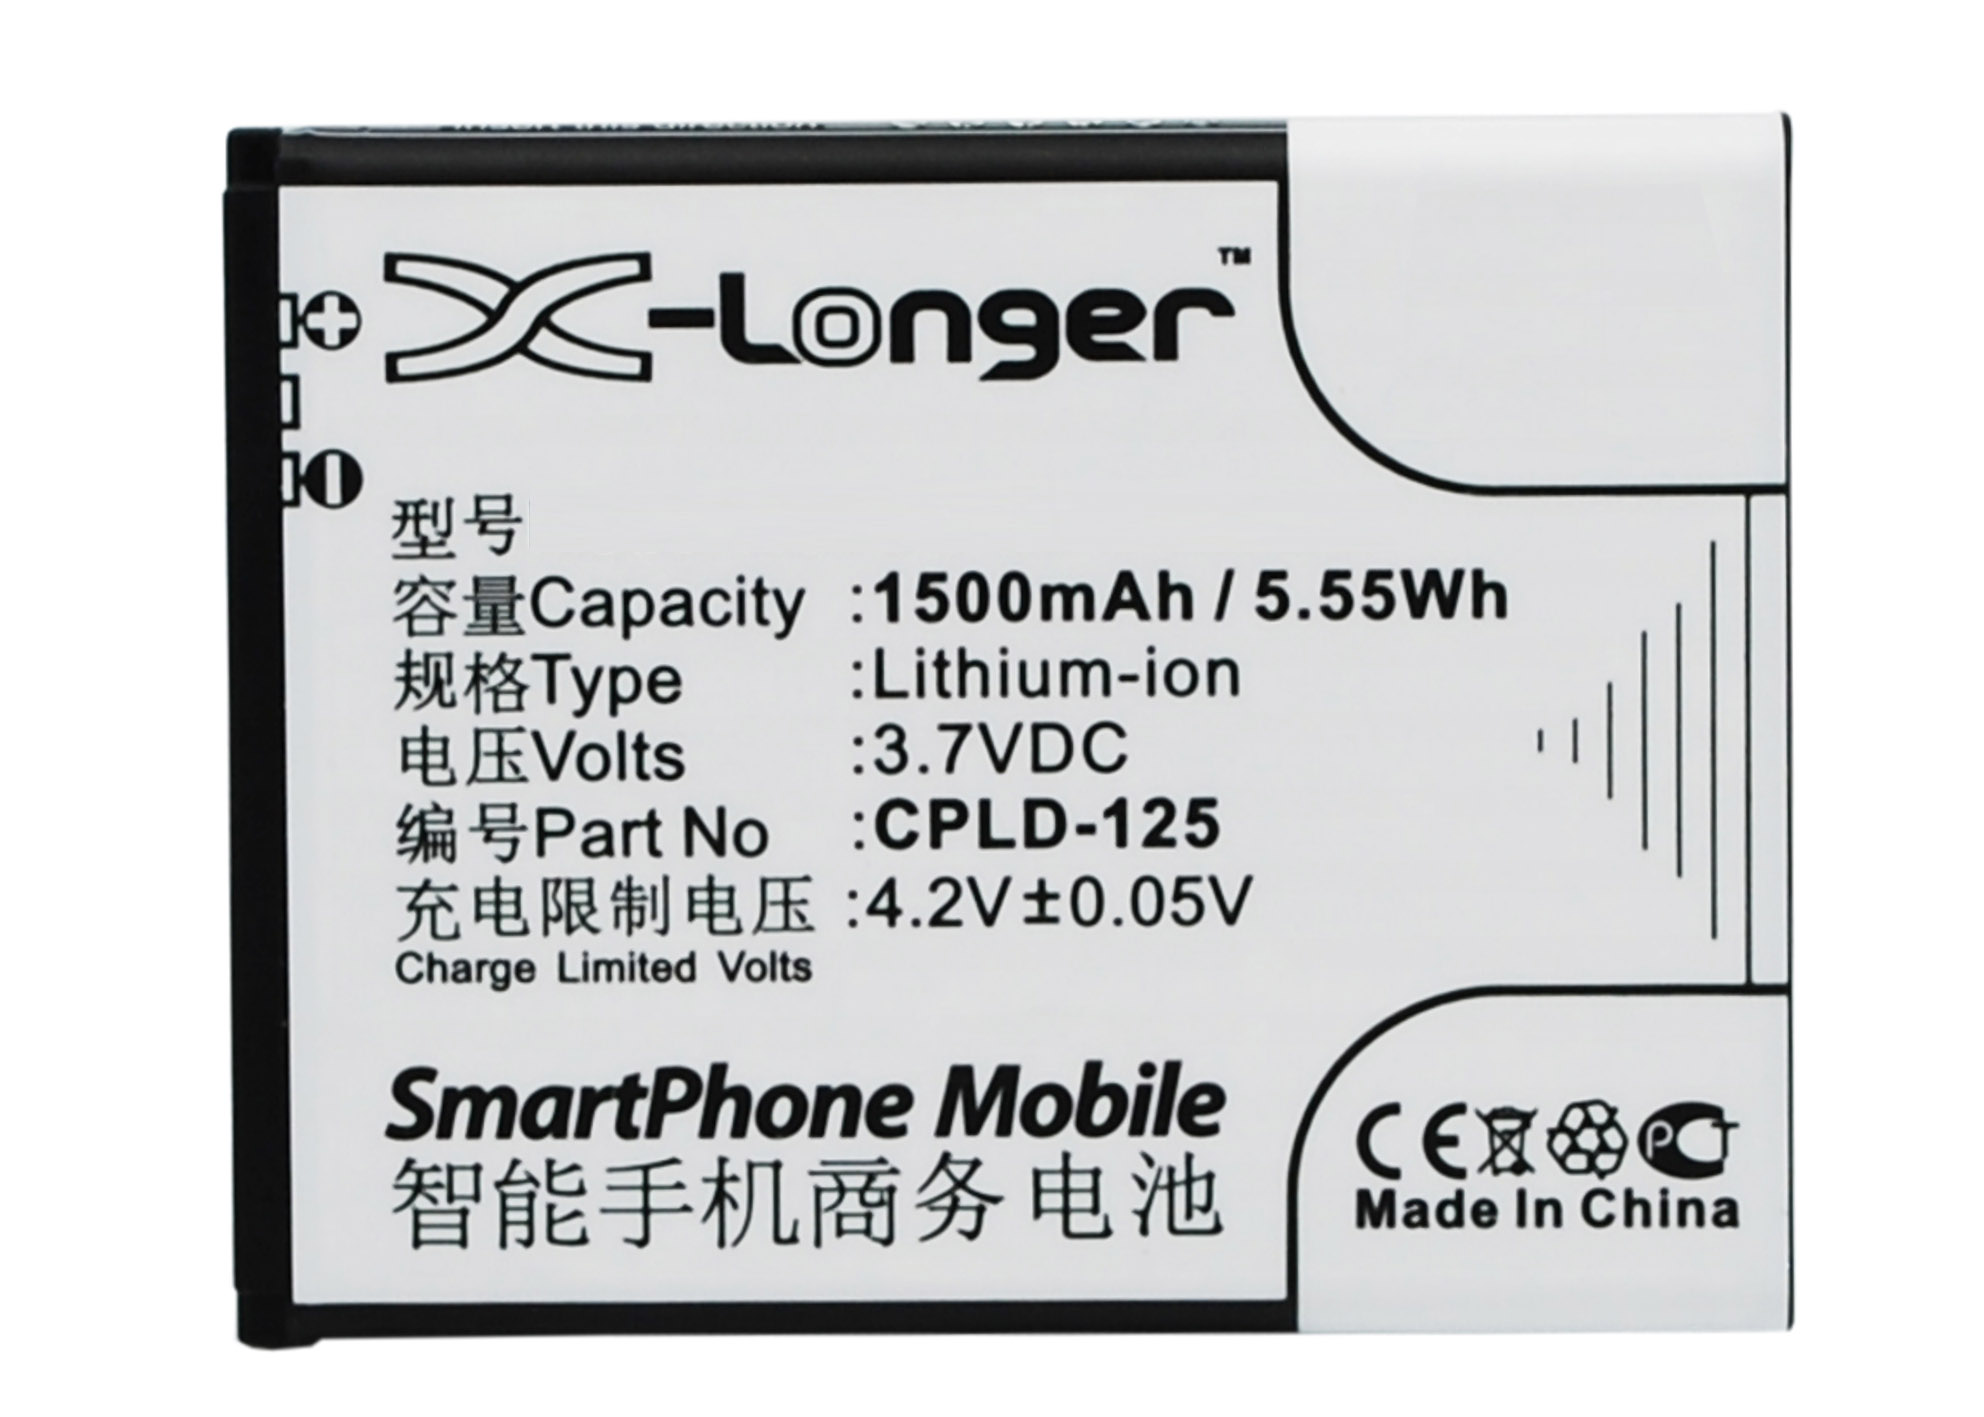 Synergy Digital Battery Compatible With Coolpad CPLD-125 Cellphone Battery - (Li-Ion, 3.7V, 1500 mAh / 5.55Wh)